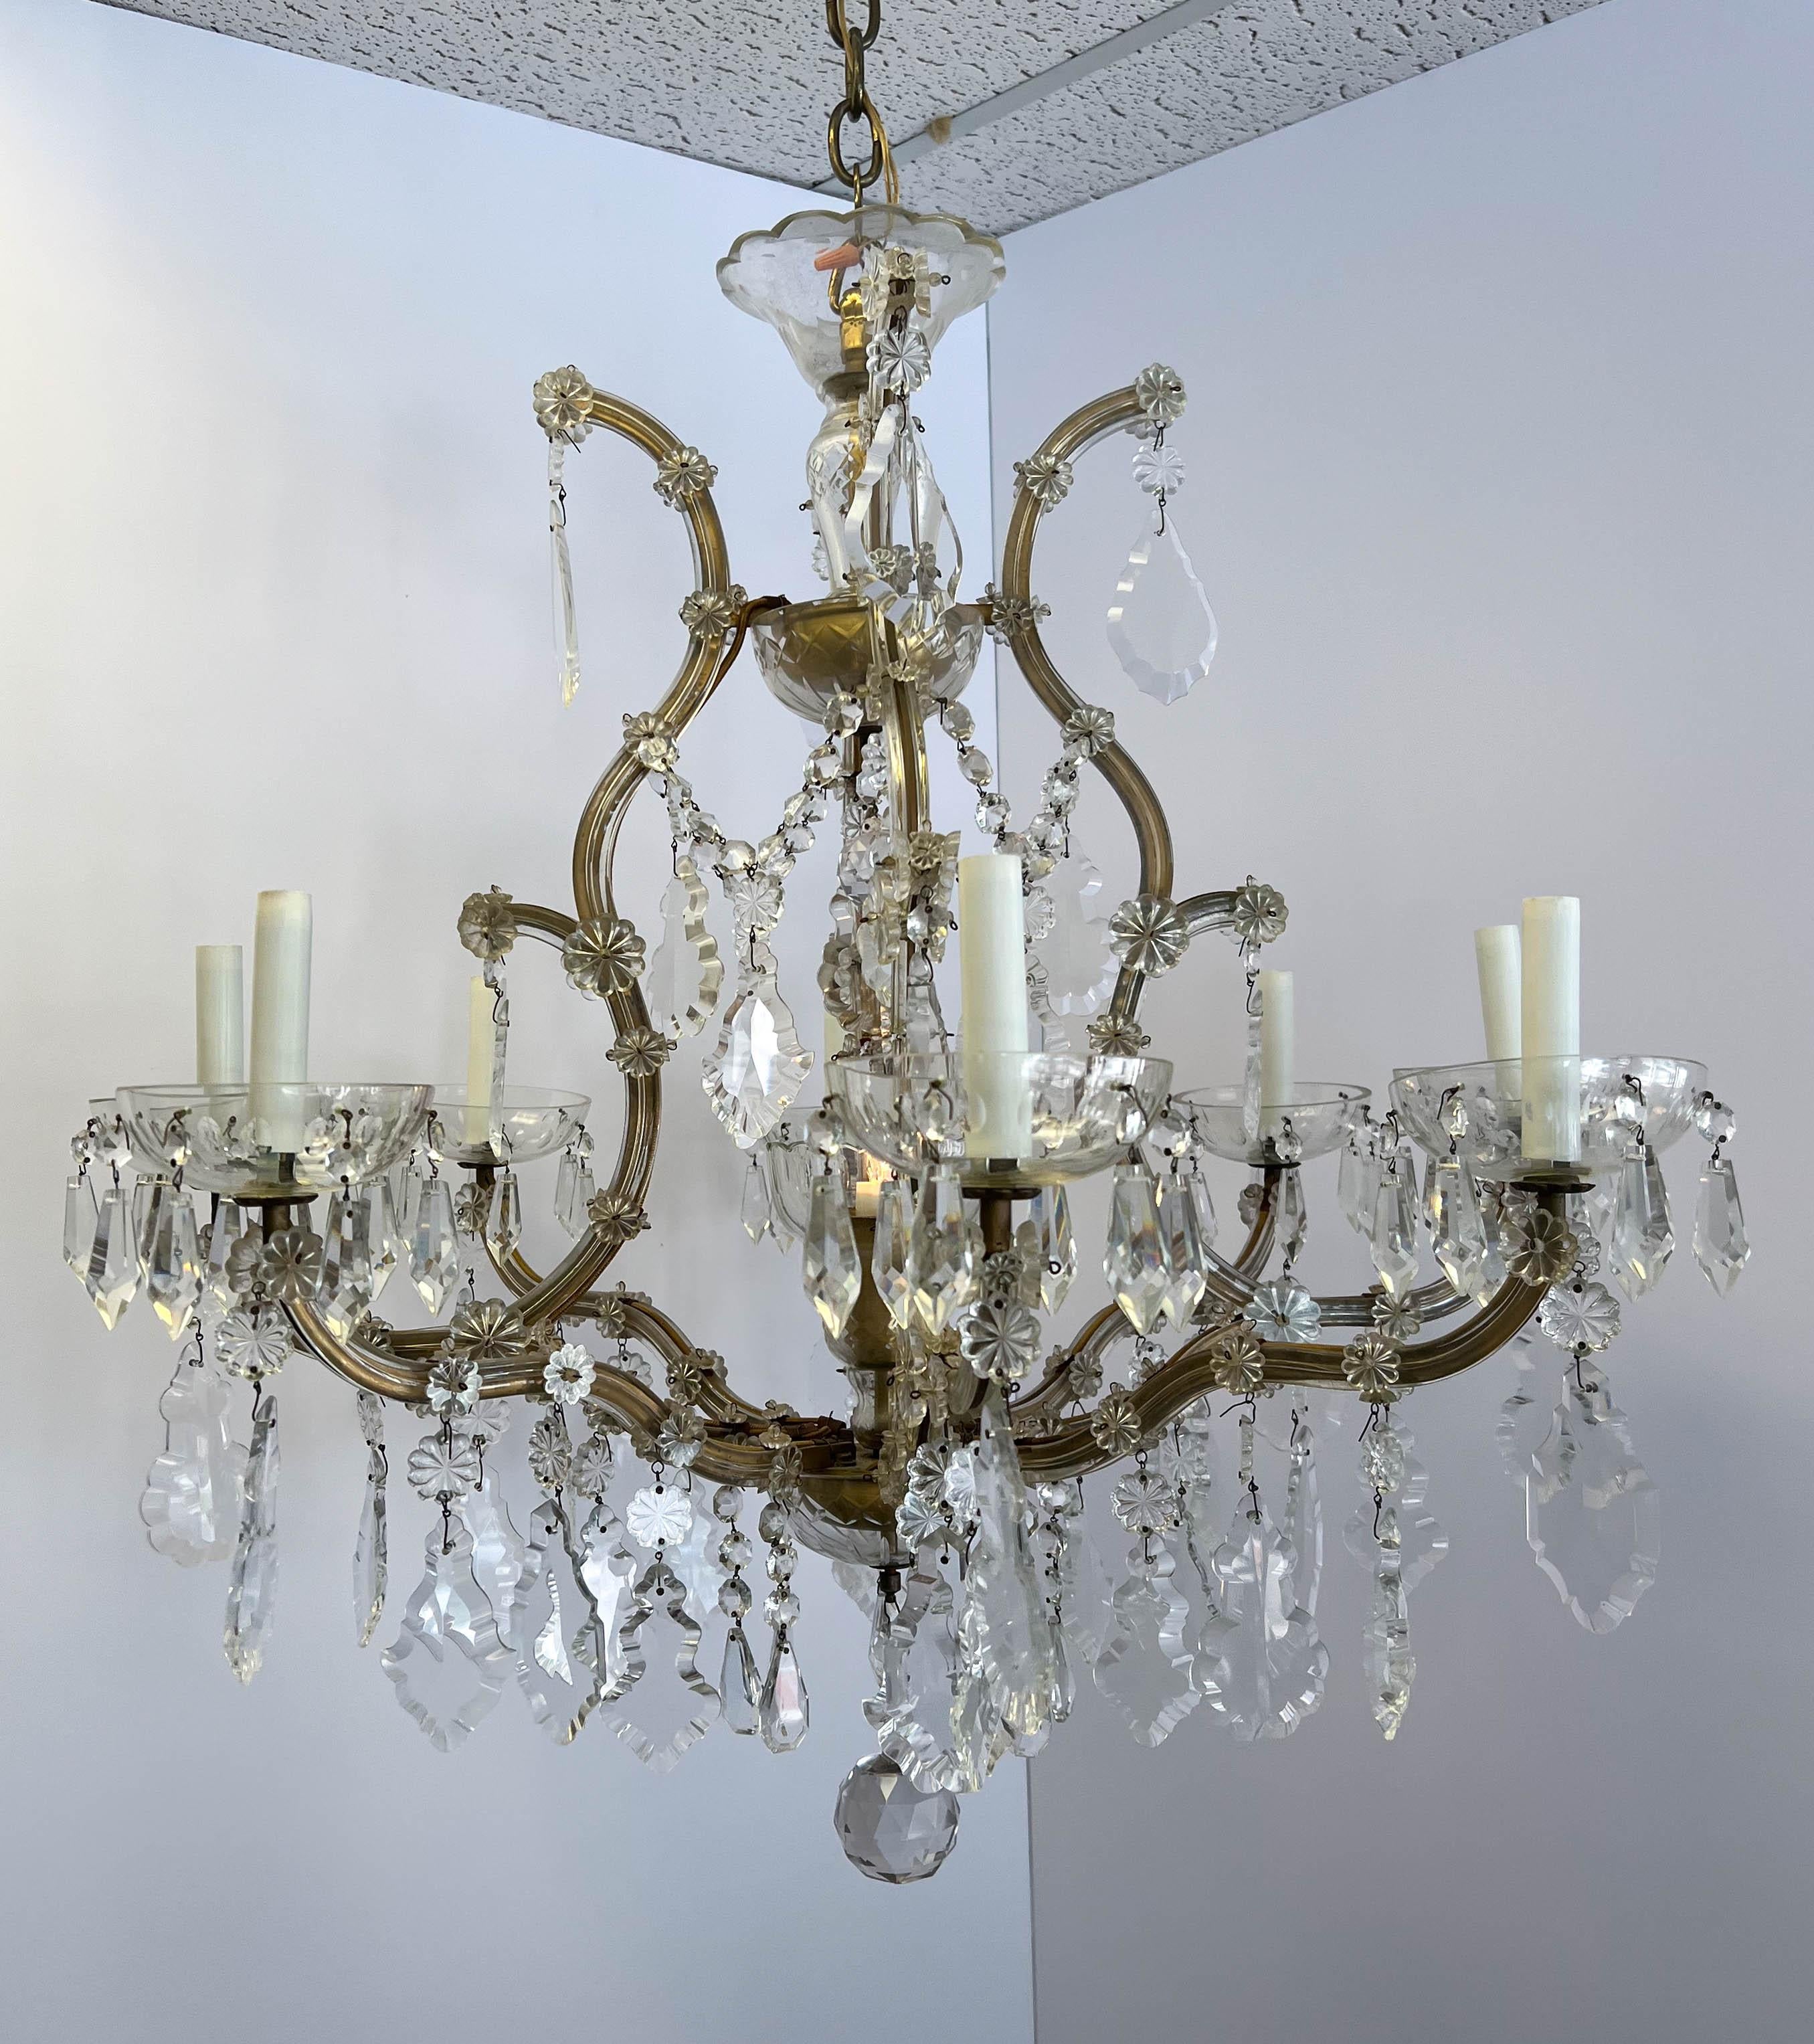 An exquisite antique eight-arm Maria Theresa chandelier made in Italy. Maria Theresa chandeliers, named after Austria’s Empress Maria Theresa, are antique crystal lighting fixtures popular worldwide for their outstanding beauty, baroque styling, and